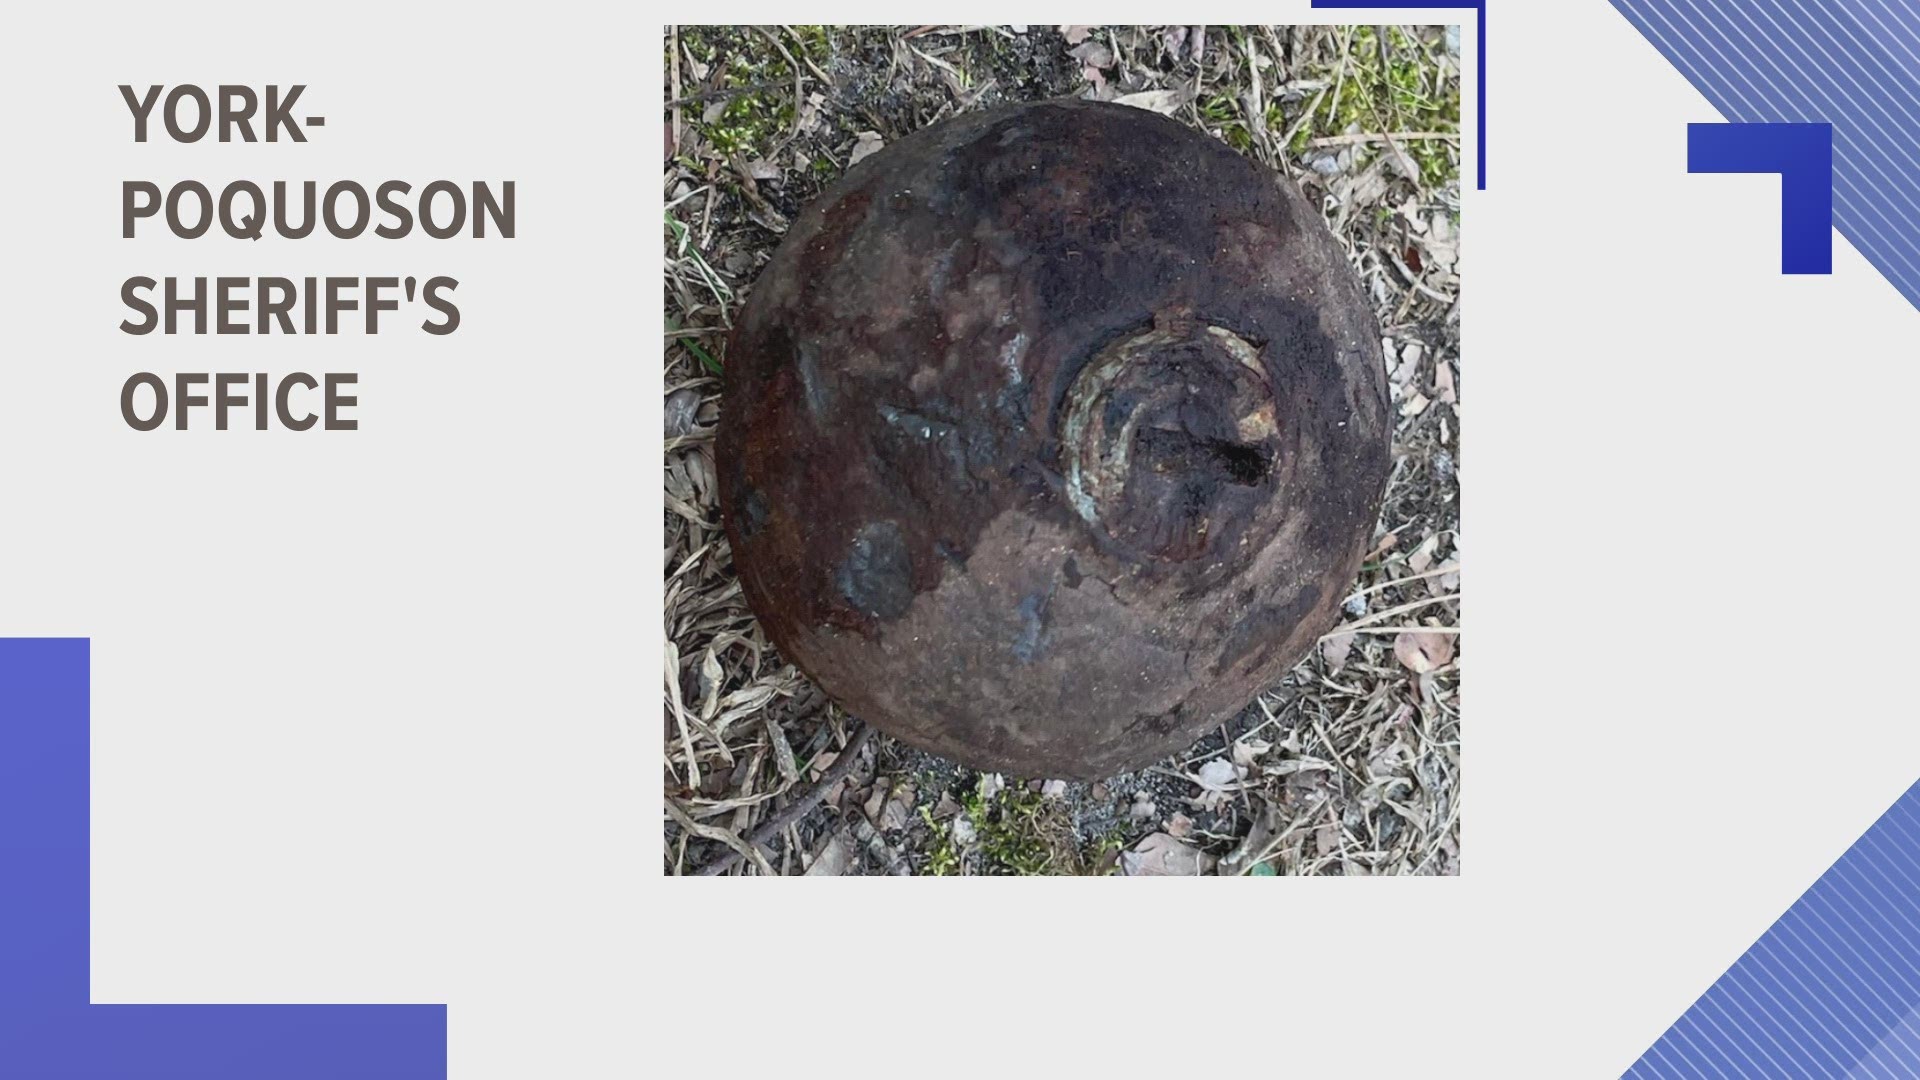 When their parents saw the 150-year-old explosive, they immediately called the York-Poquoson Sheriff's Office. Naval Weapons Station experts will detonate it.